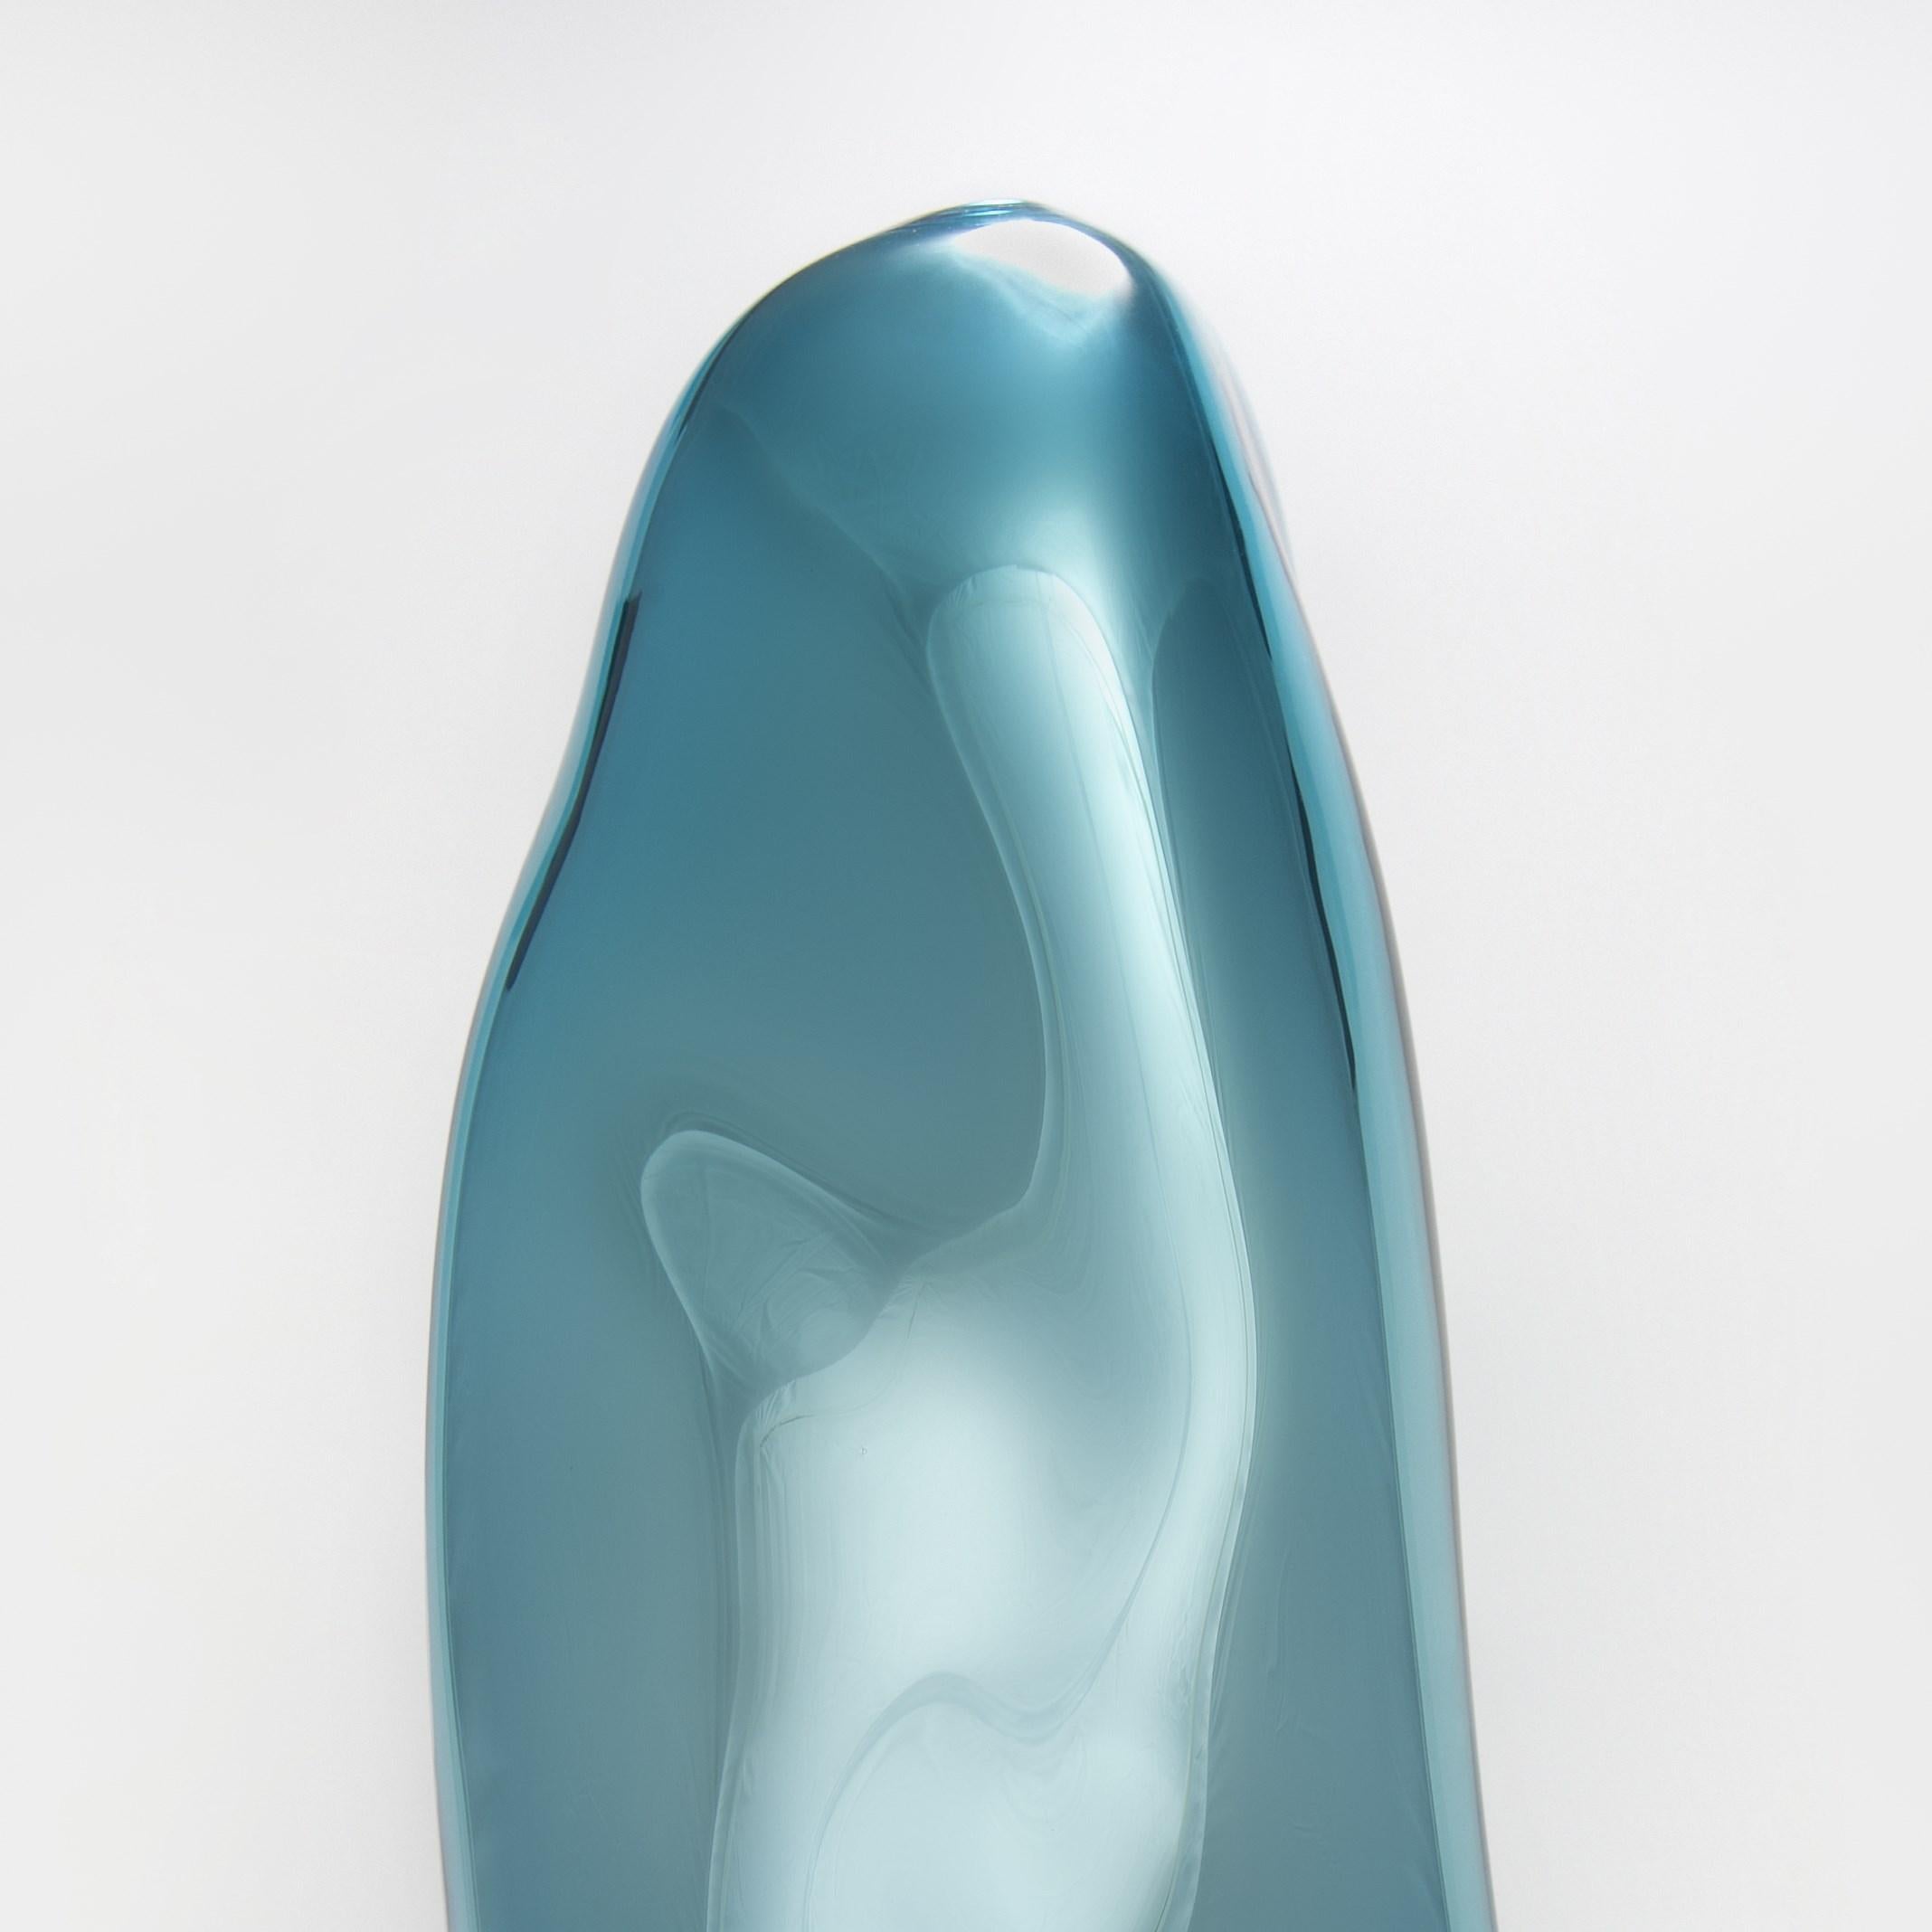 Organic Modern Glass v Metal in Turquoise, an Aqua Reflective Glass Sculpture by Liam Reeves